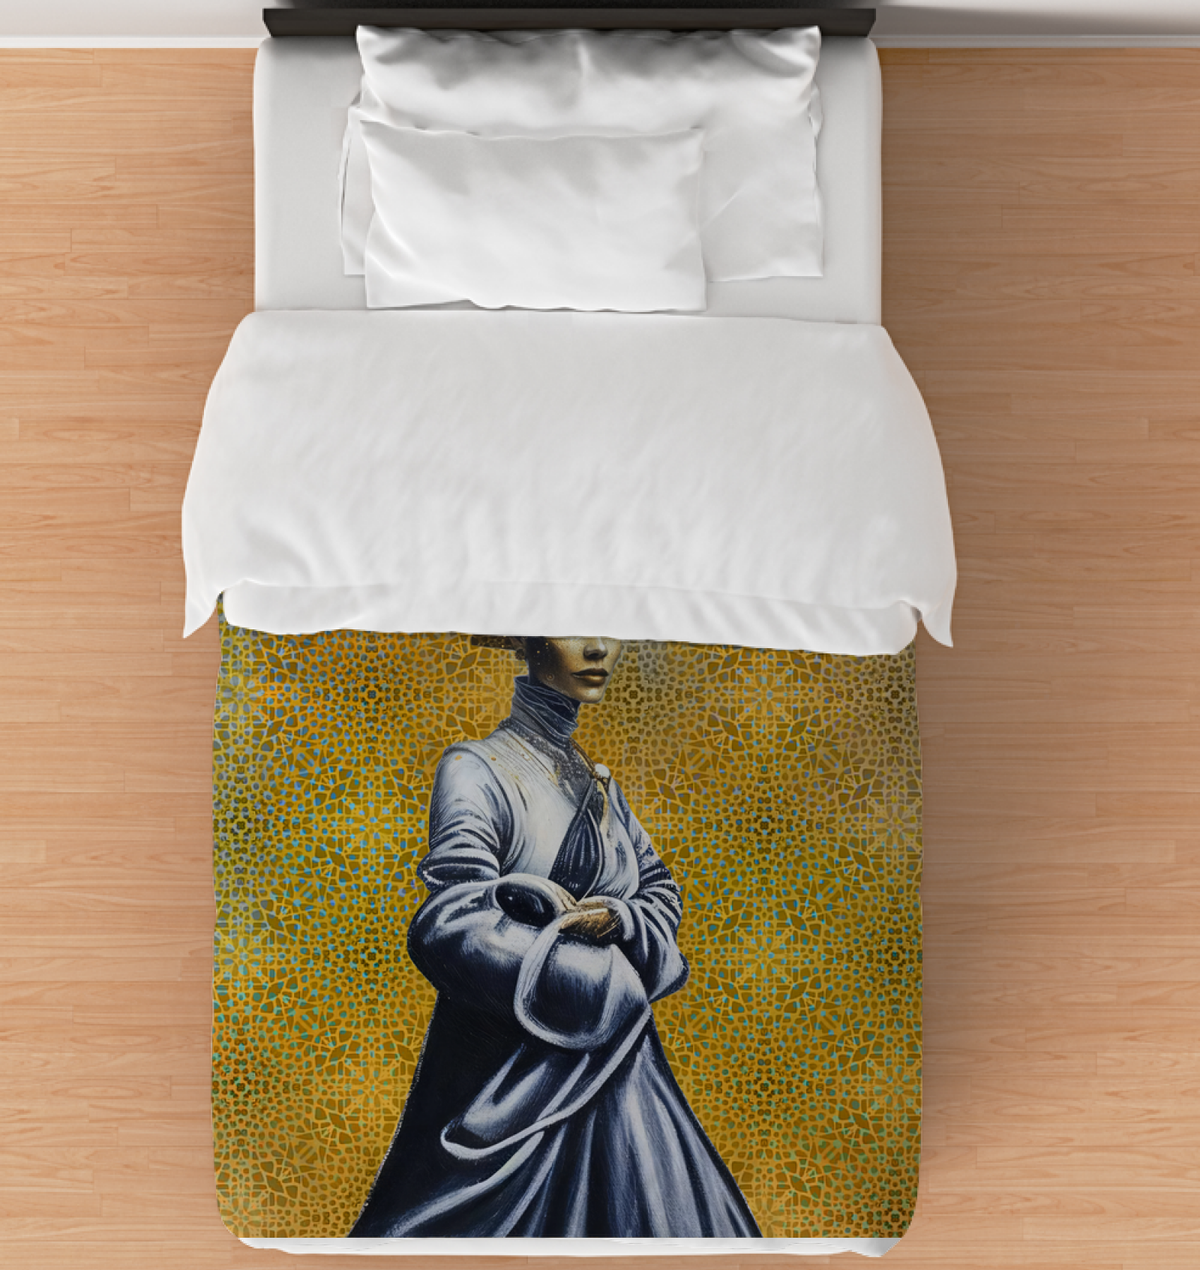 Galactic Guardian Duvet Cover showcasing a cosmic design on a bed